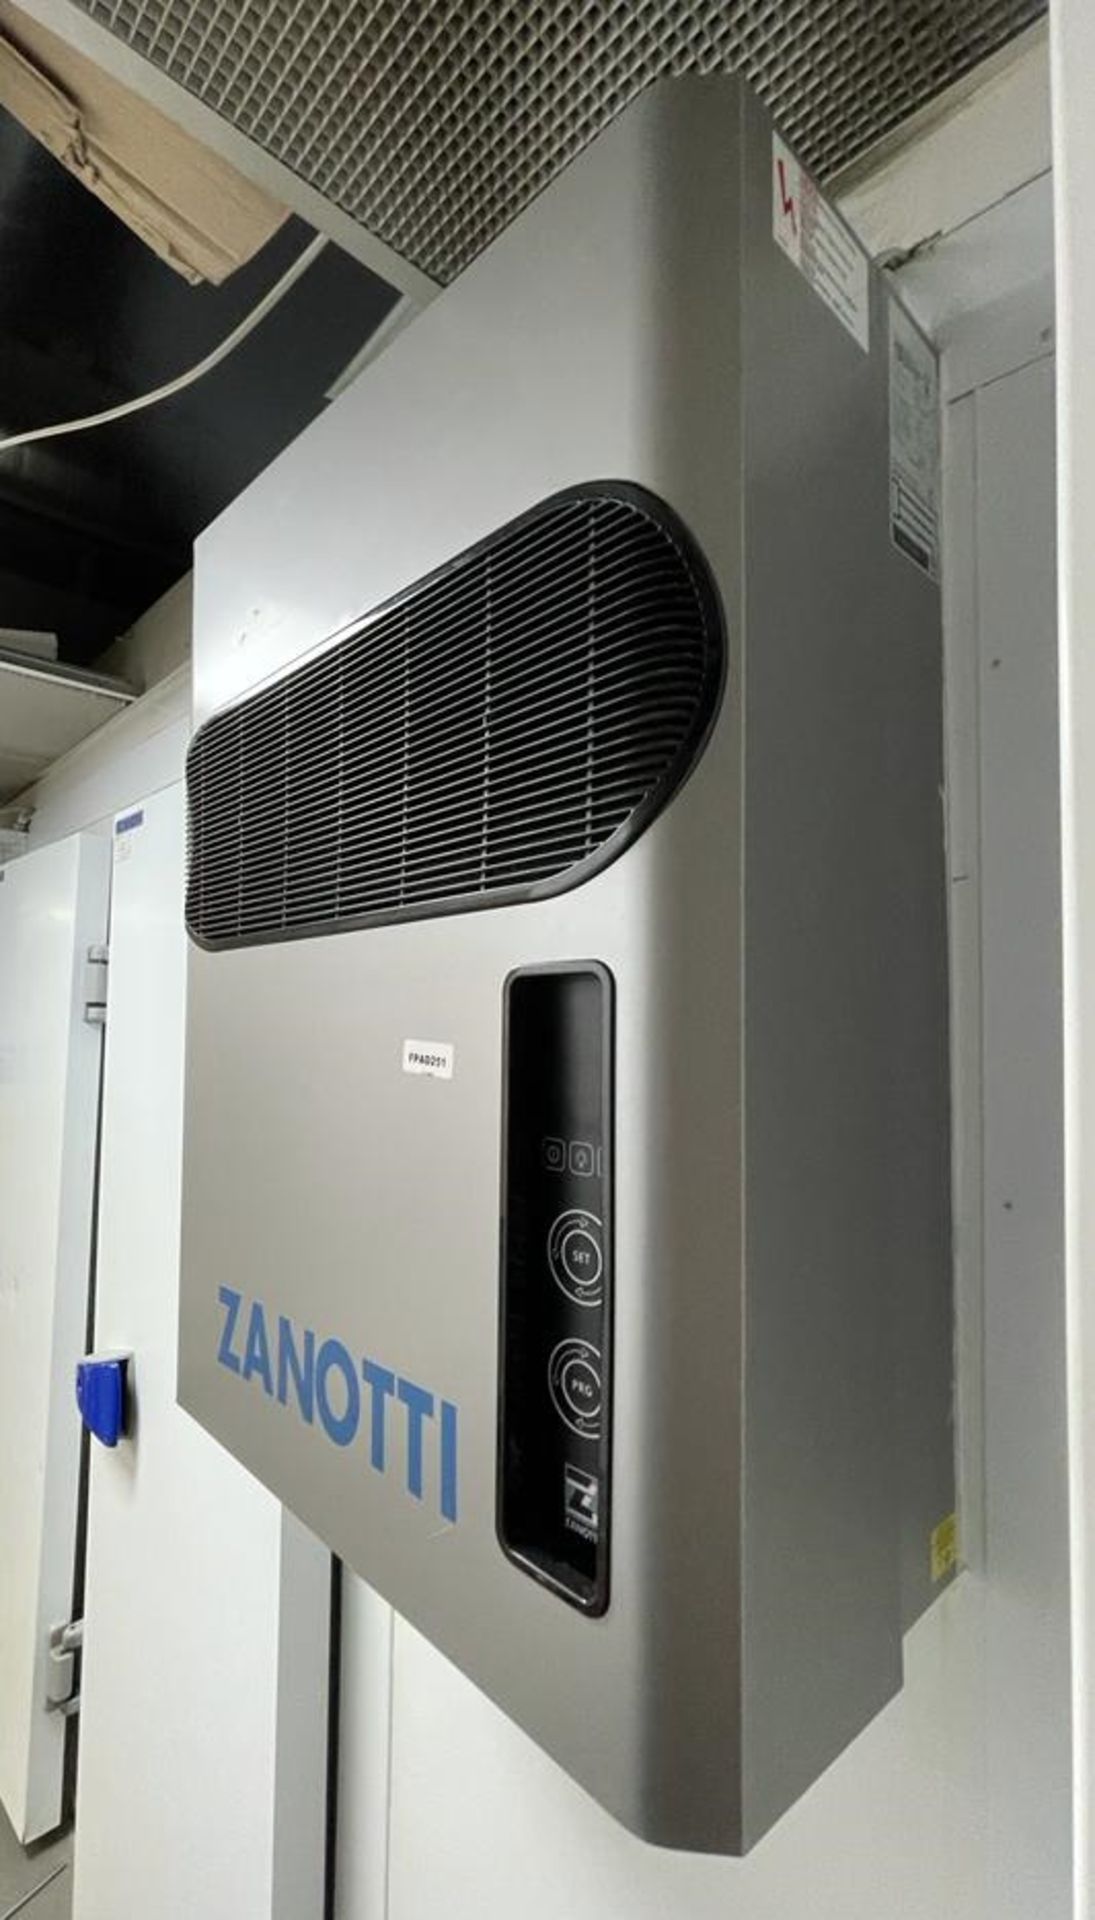 1 x Walk In Refrigerated Cold and Freezer With Zanotti Control Units - Ref: BK249 - CL686 - - Image 11 of 24